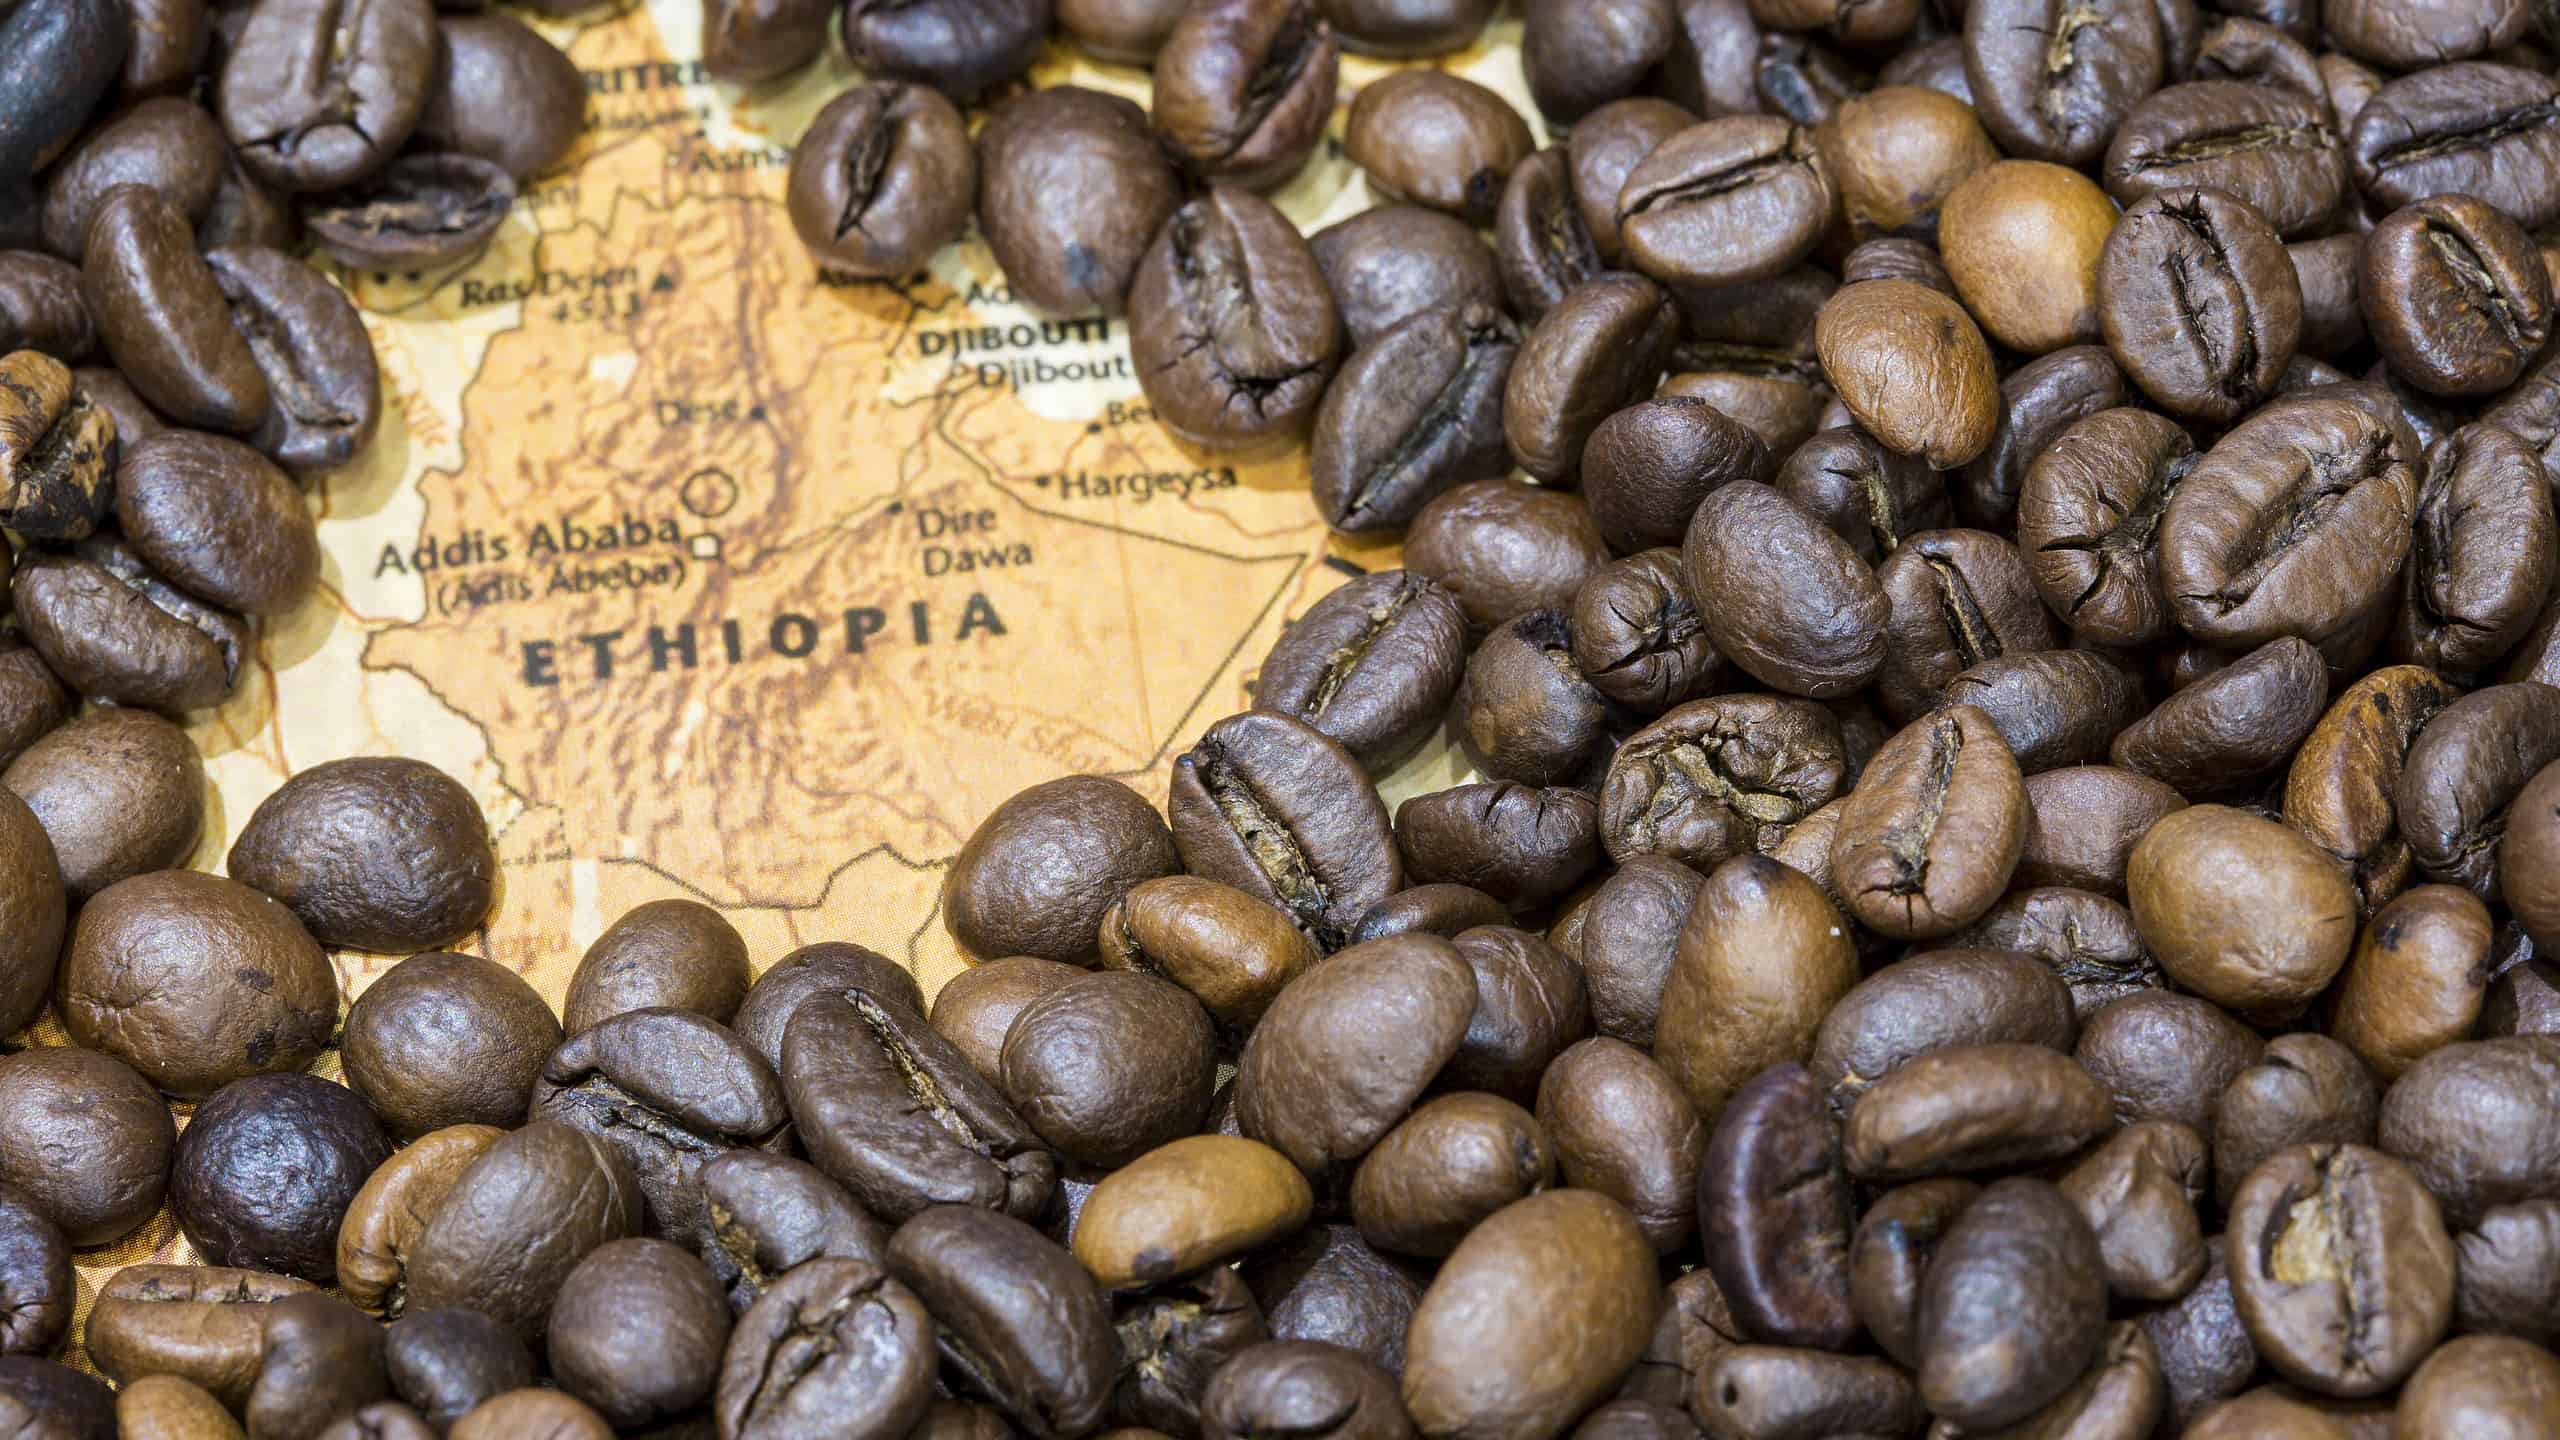 Jimma is one of the top producers of coffee in Ethiopia